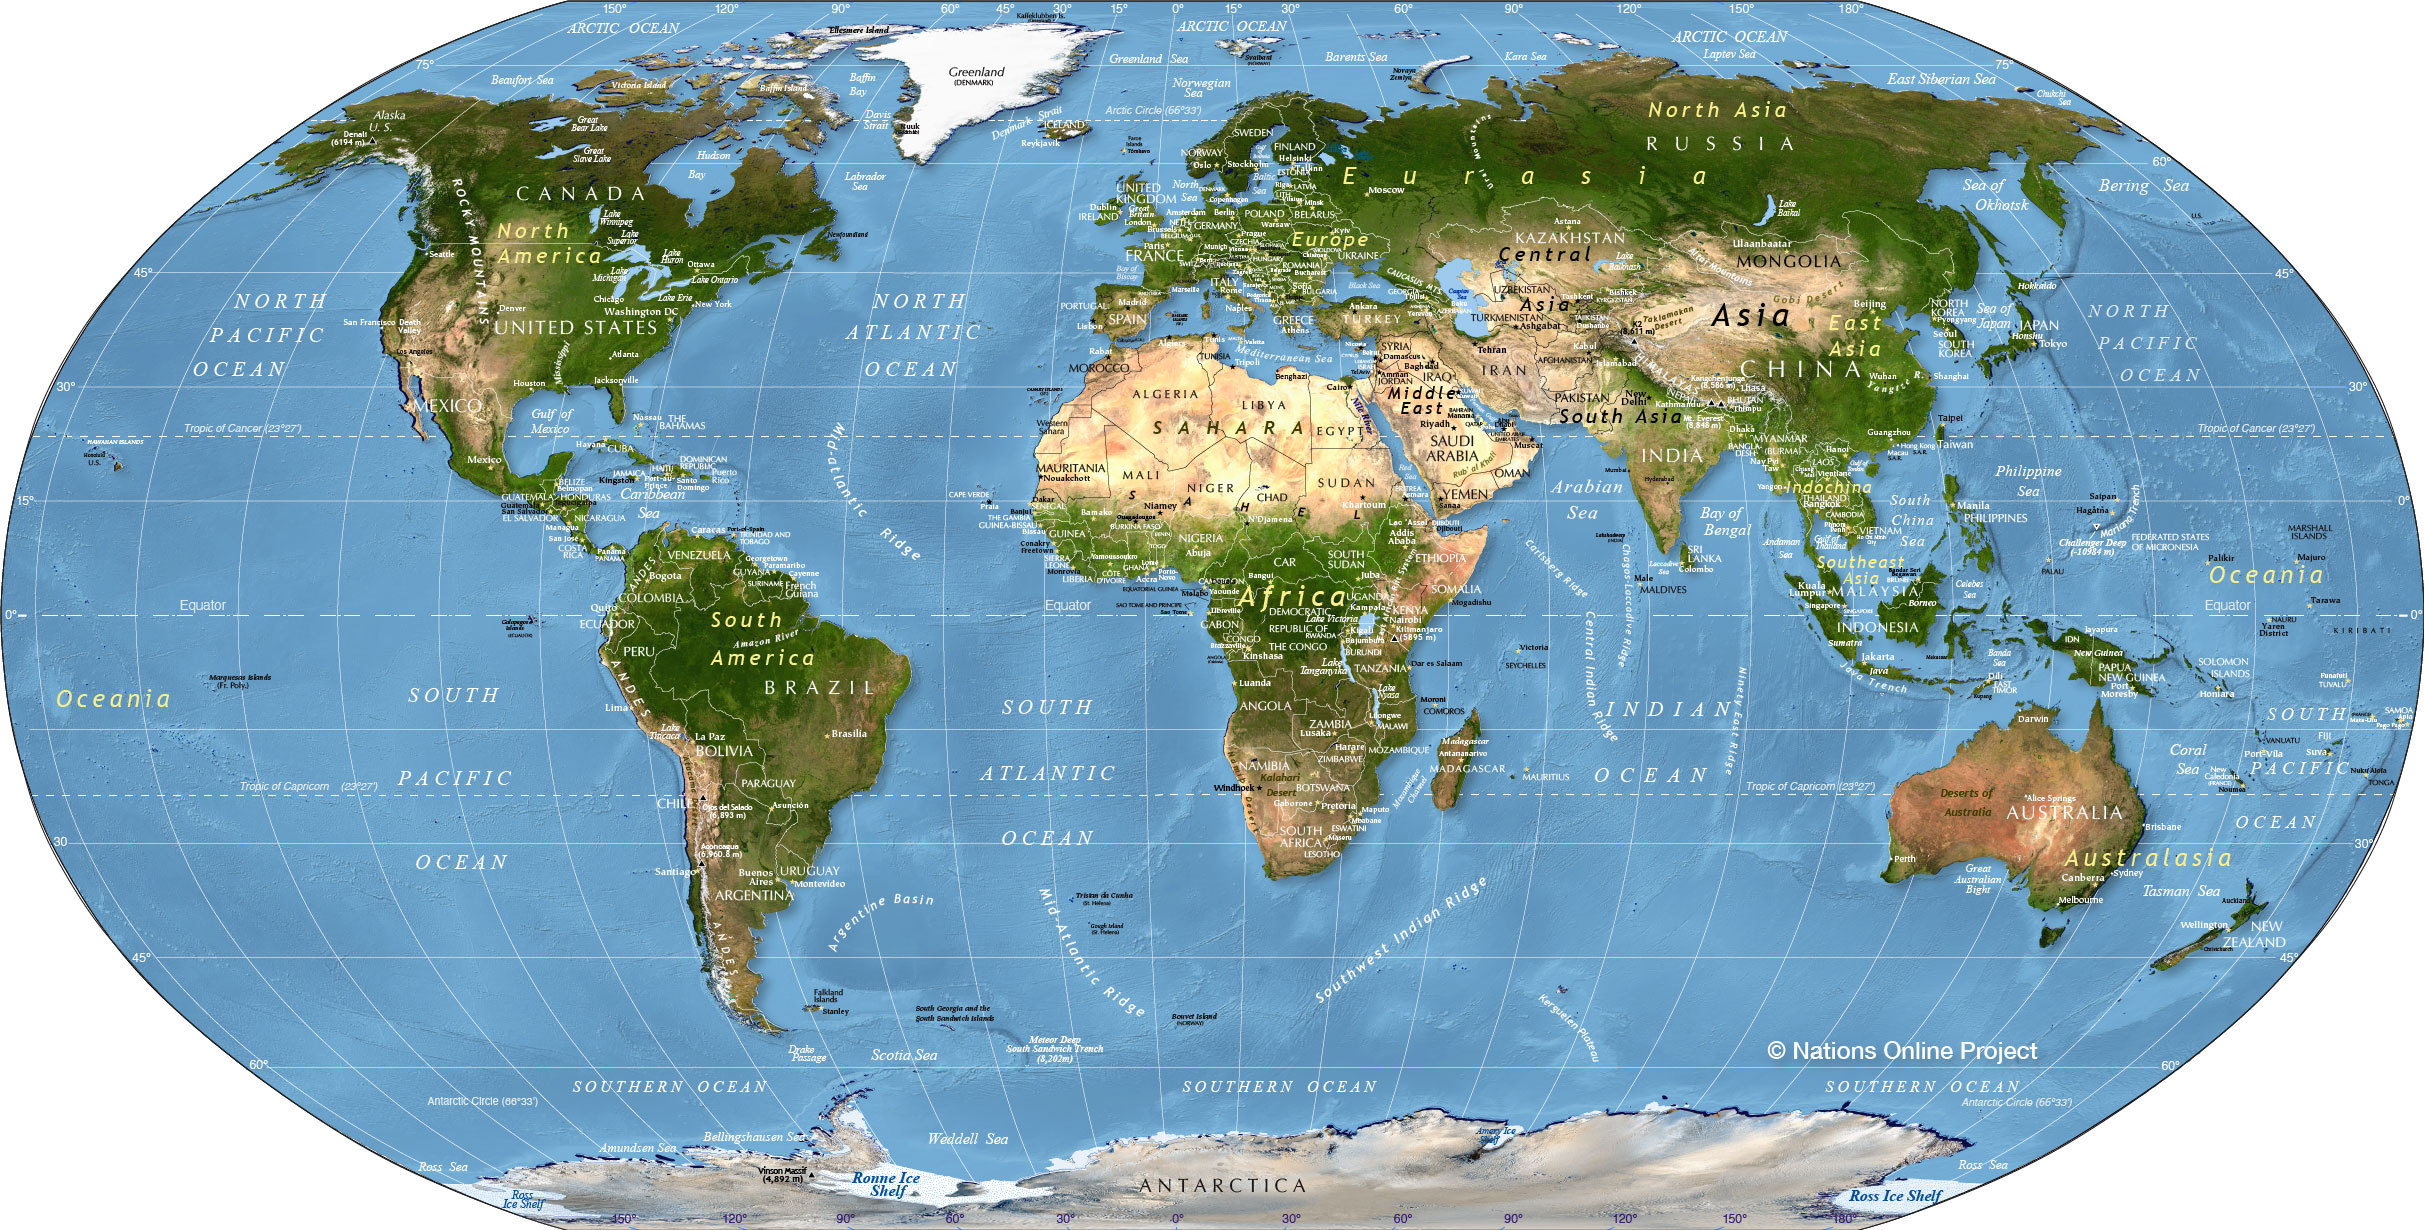 Physical Map of the World showing continents, oceans, and countries